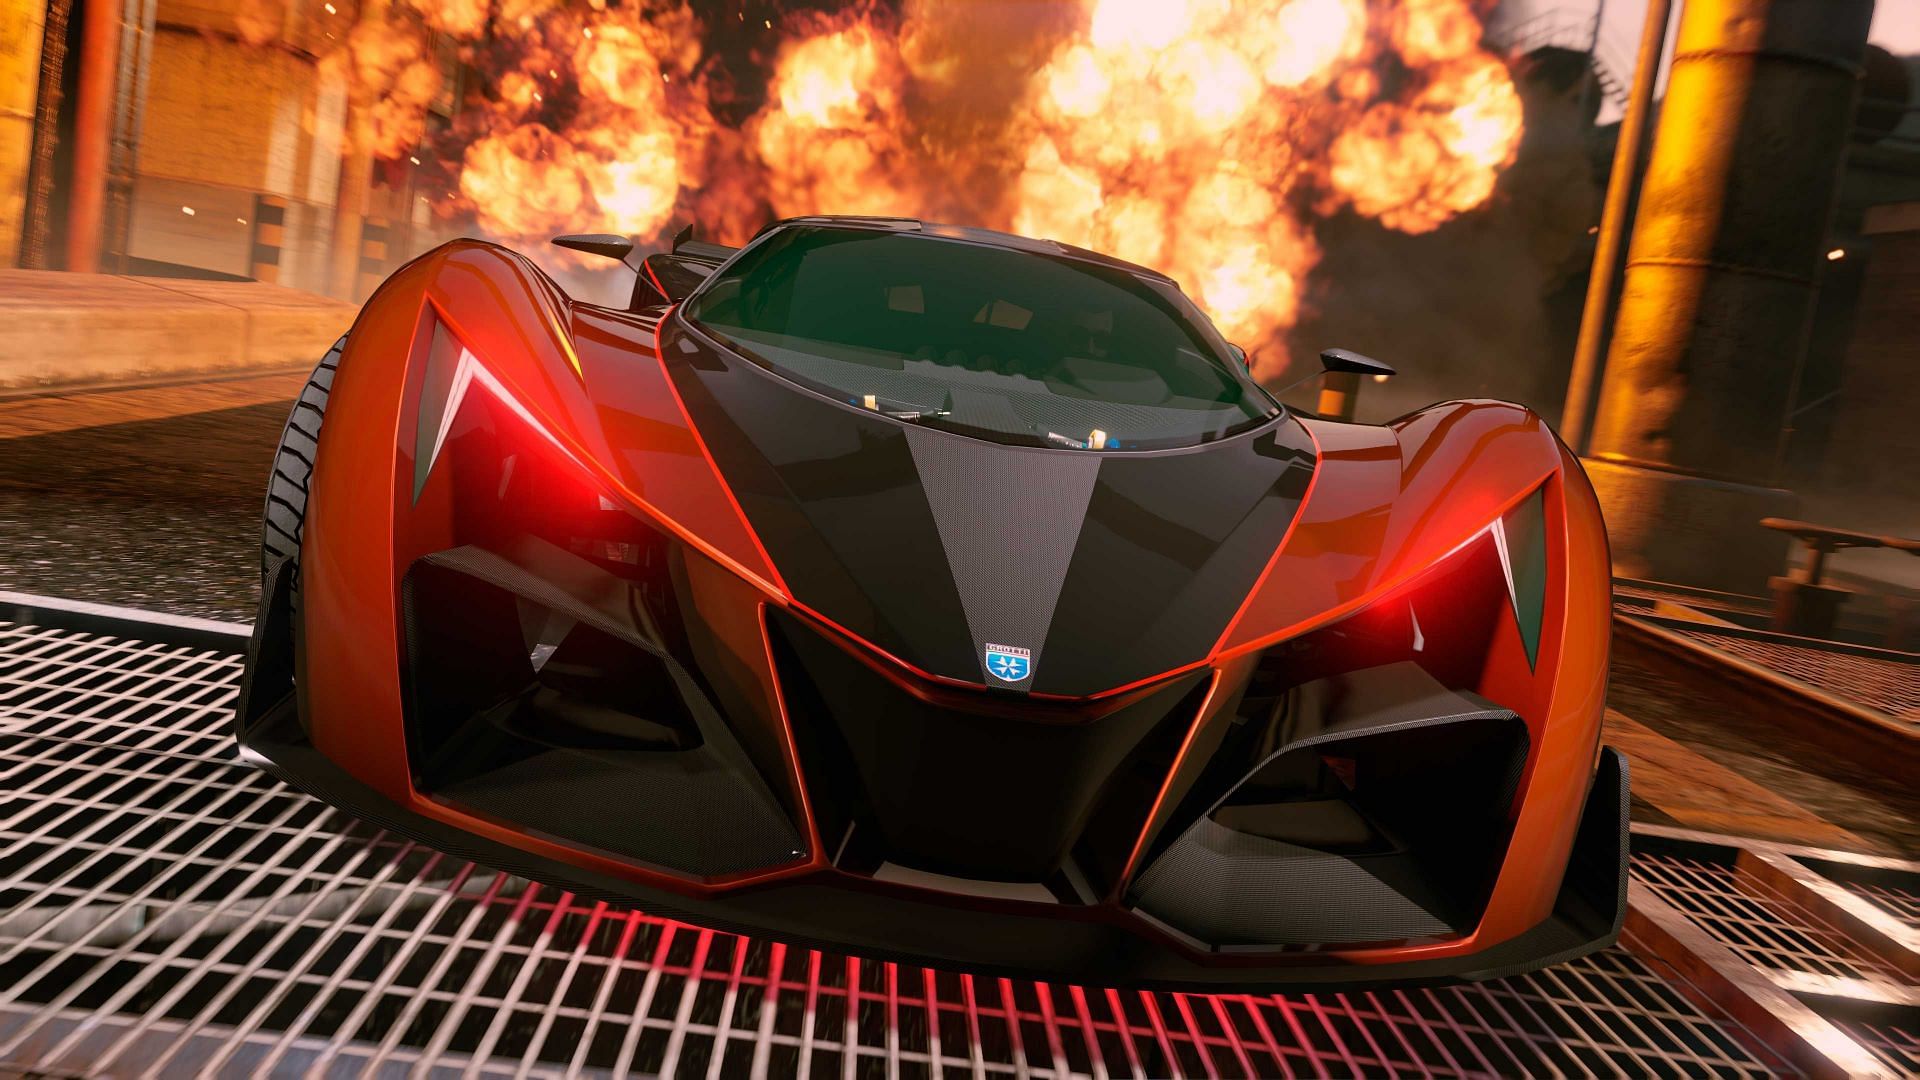 The Grotti X80 Proto is one of the best things to buy in GTA Online this week (Image via Rockstar Games)